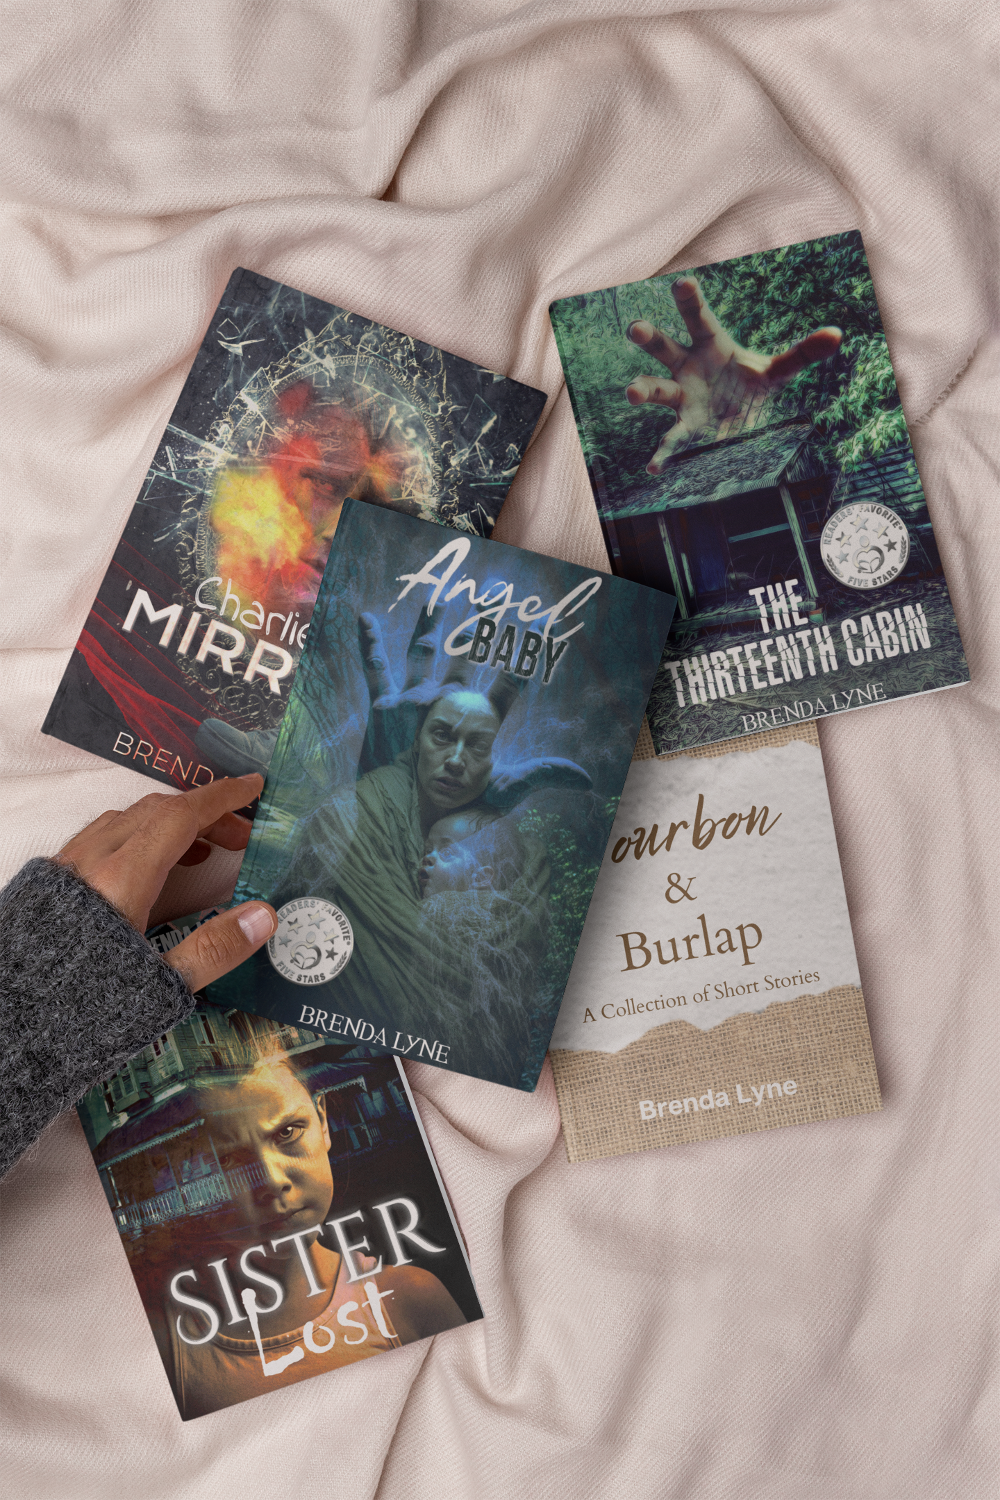 Five paranormal mystery thriller books by Brenda Lyne: Angel Baby, The Thirteenth Cabin, Sister Lost, Charlie's Mirror, Bourbon and Burlap